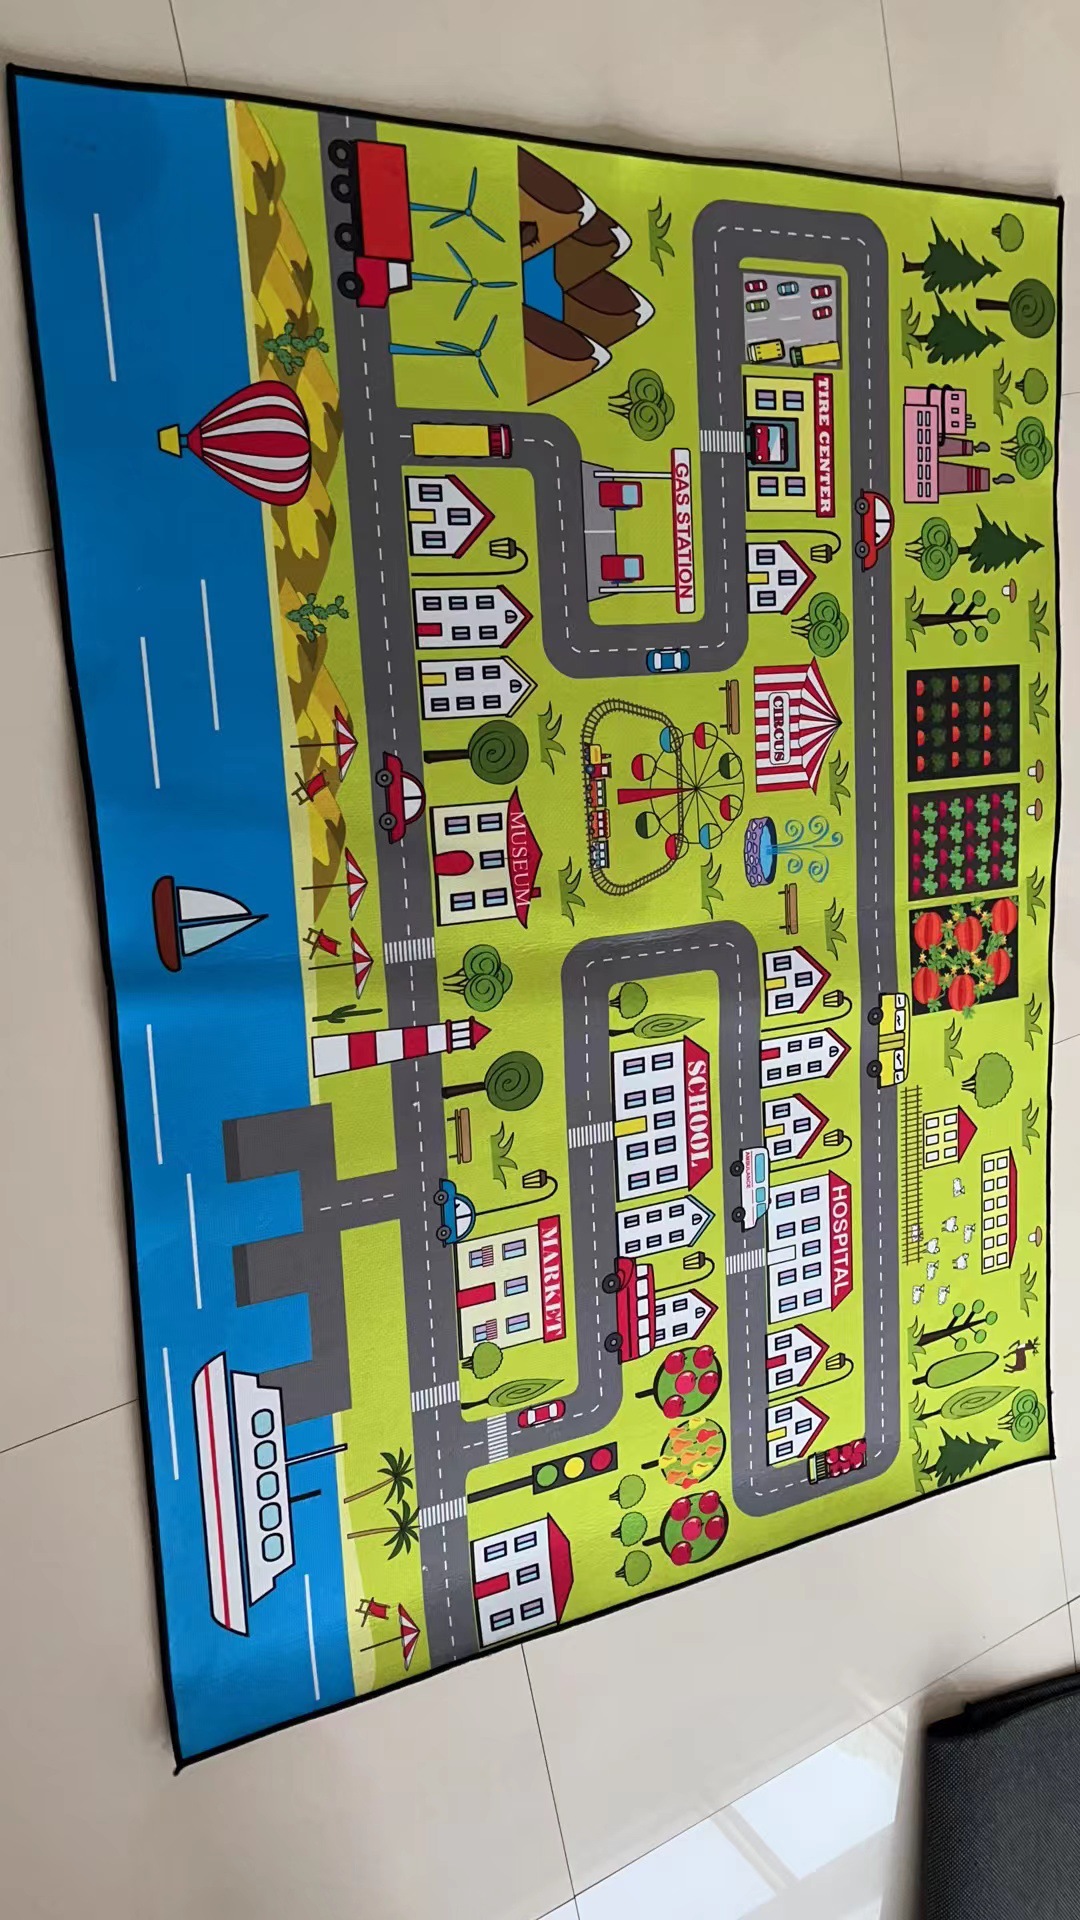 Children's Crawling Carpet City Traffic Scene Map Toy Blankets Road Track Parking Lot Floor Mat One Piece Dropshipping